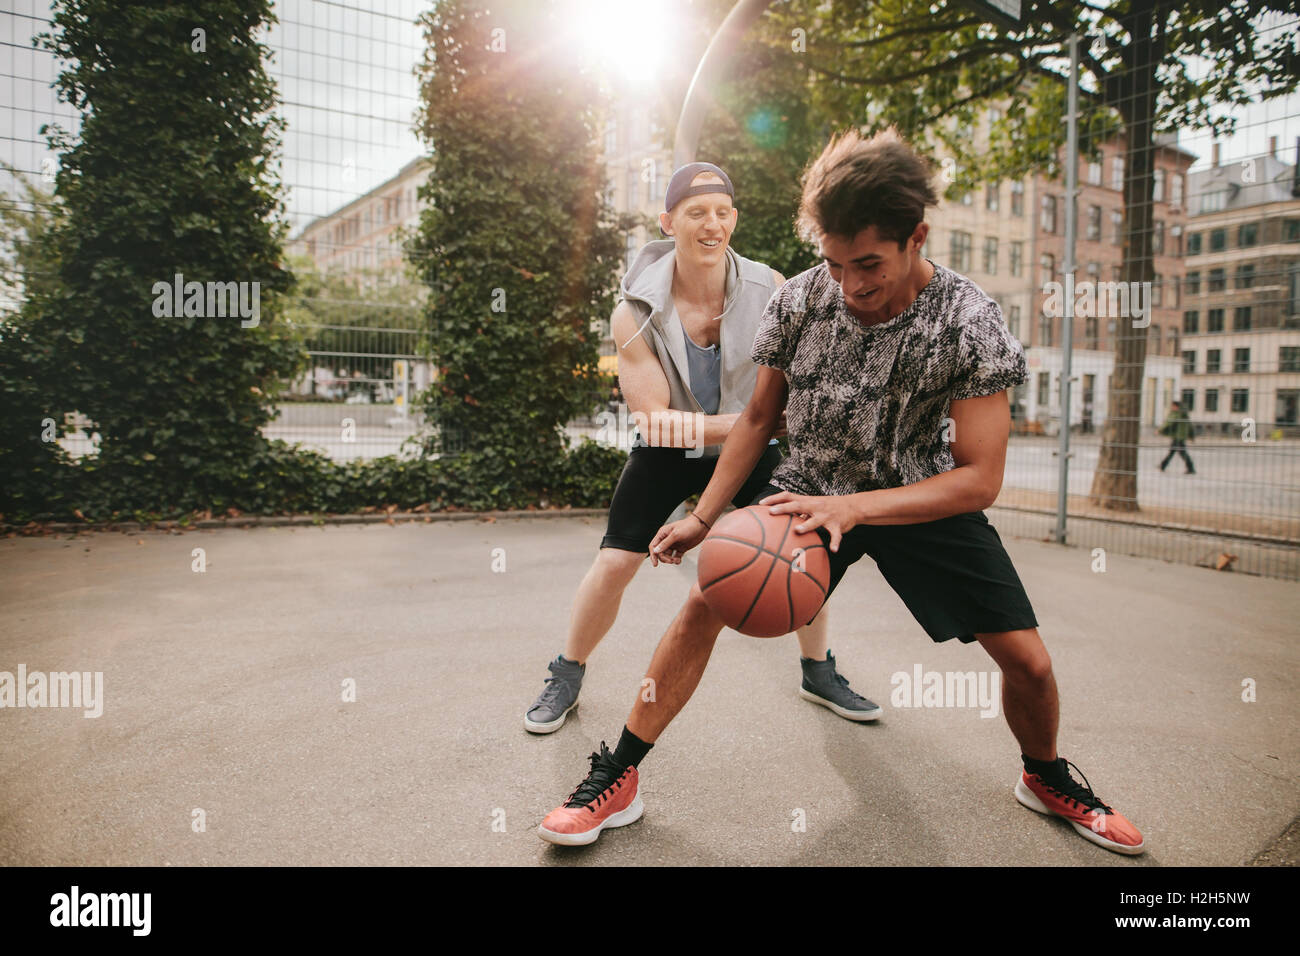 Two young man on basketball court dribbling with ball. Friends playing basketball on court and having fun. Stock Photo